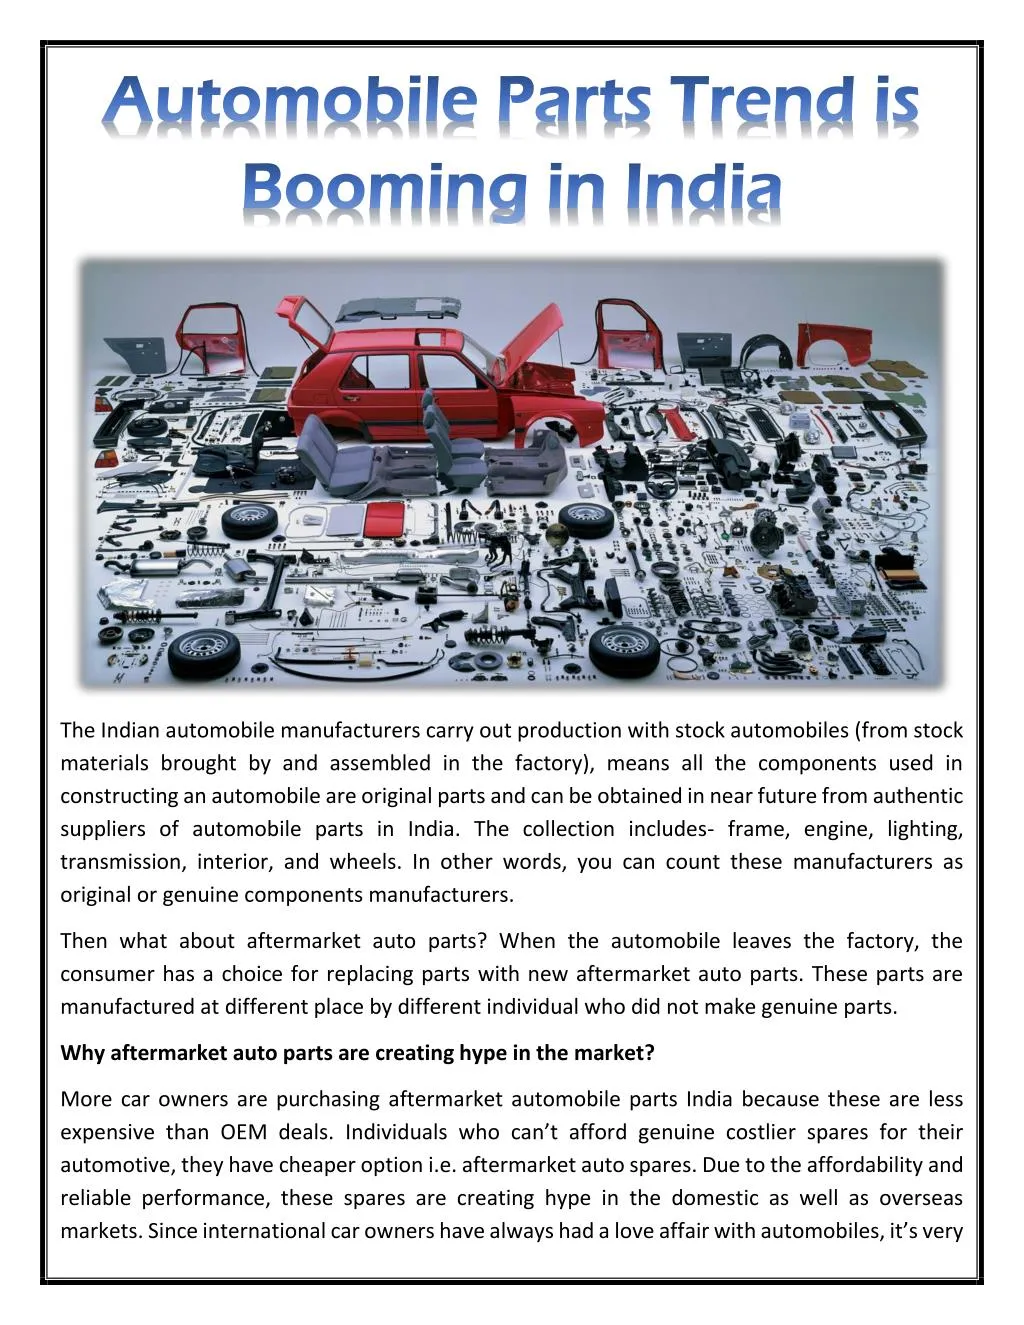 the indian automobile manufacturers carry